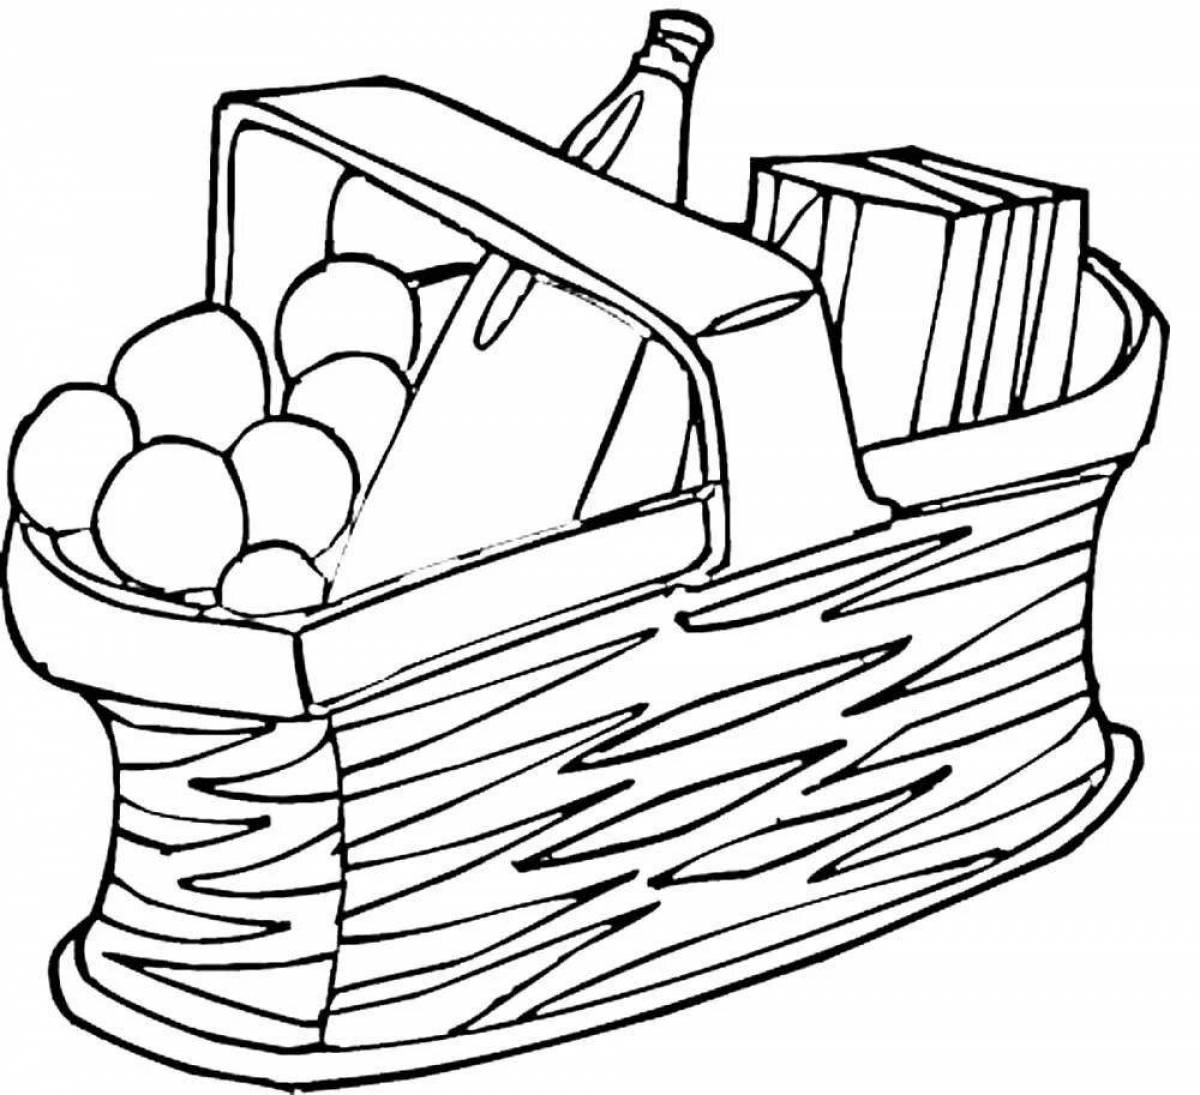 Coloring book decorated grocery basket